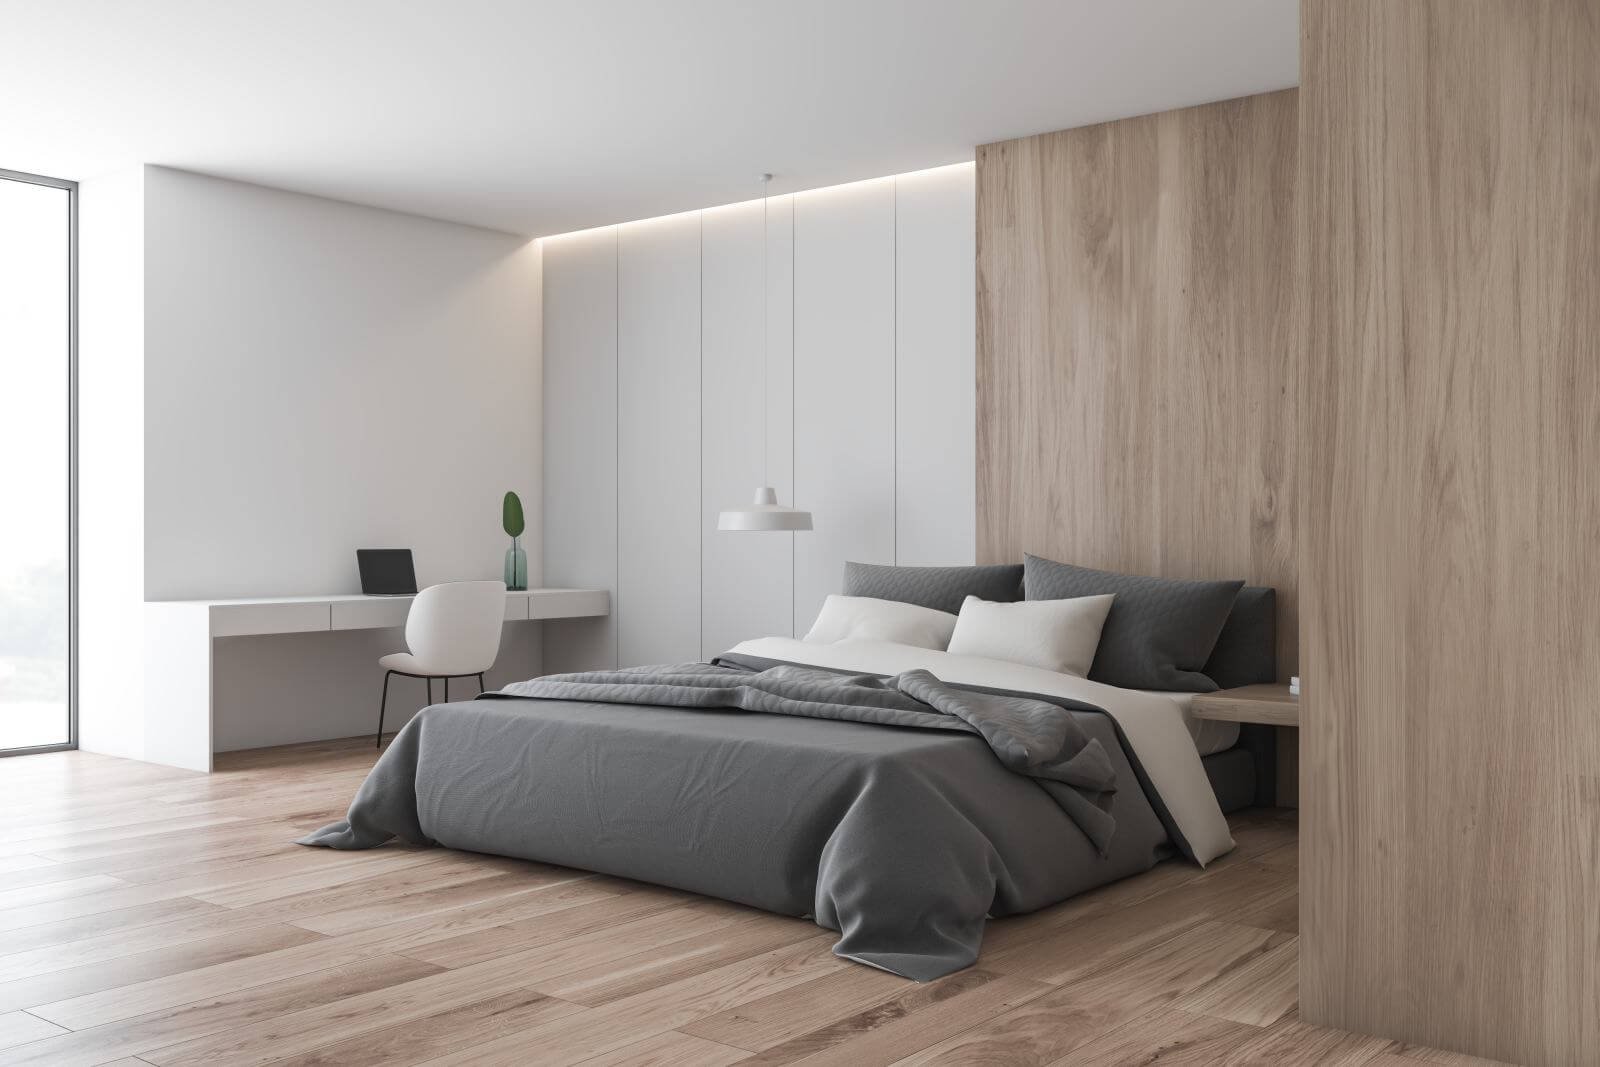 Corner of bedroom with white and wooden walls, wooden floor, master bed and white home office area with table and laptop. 3d rendering